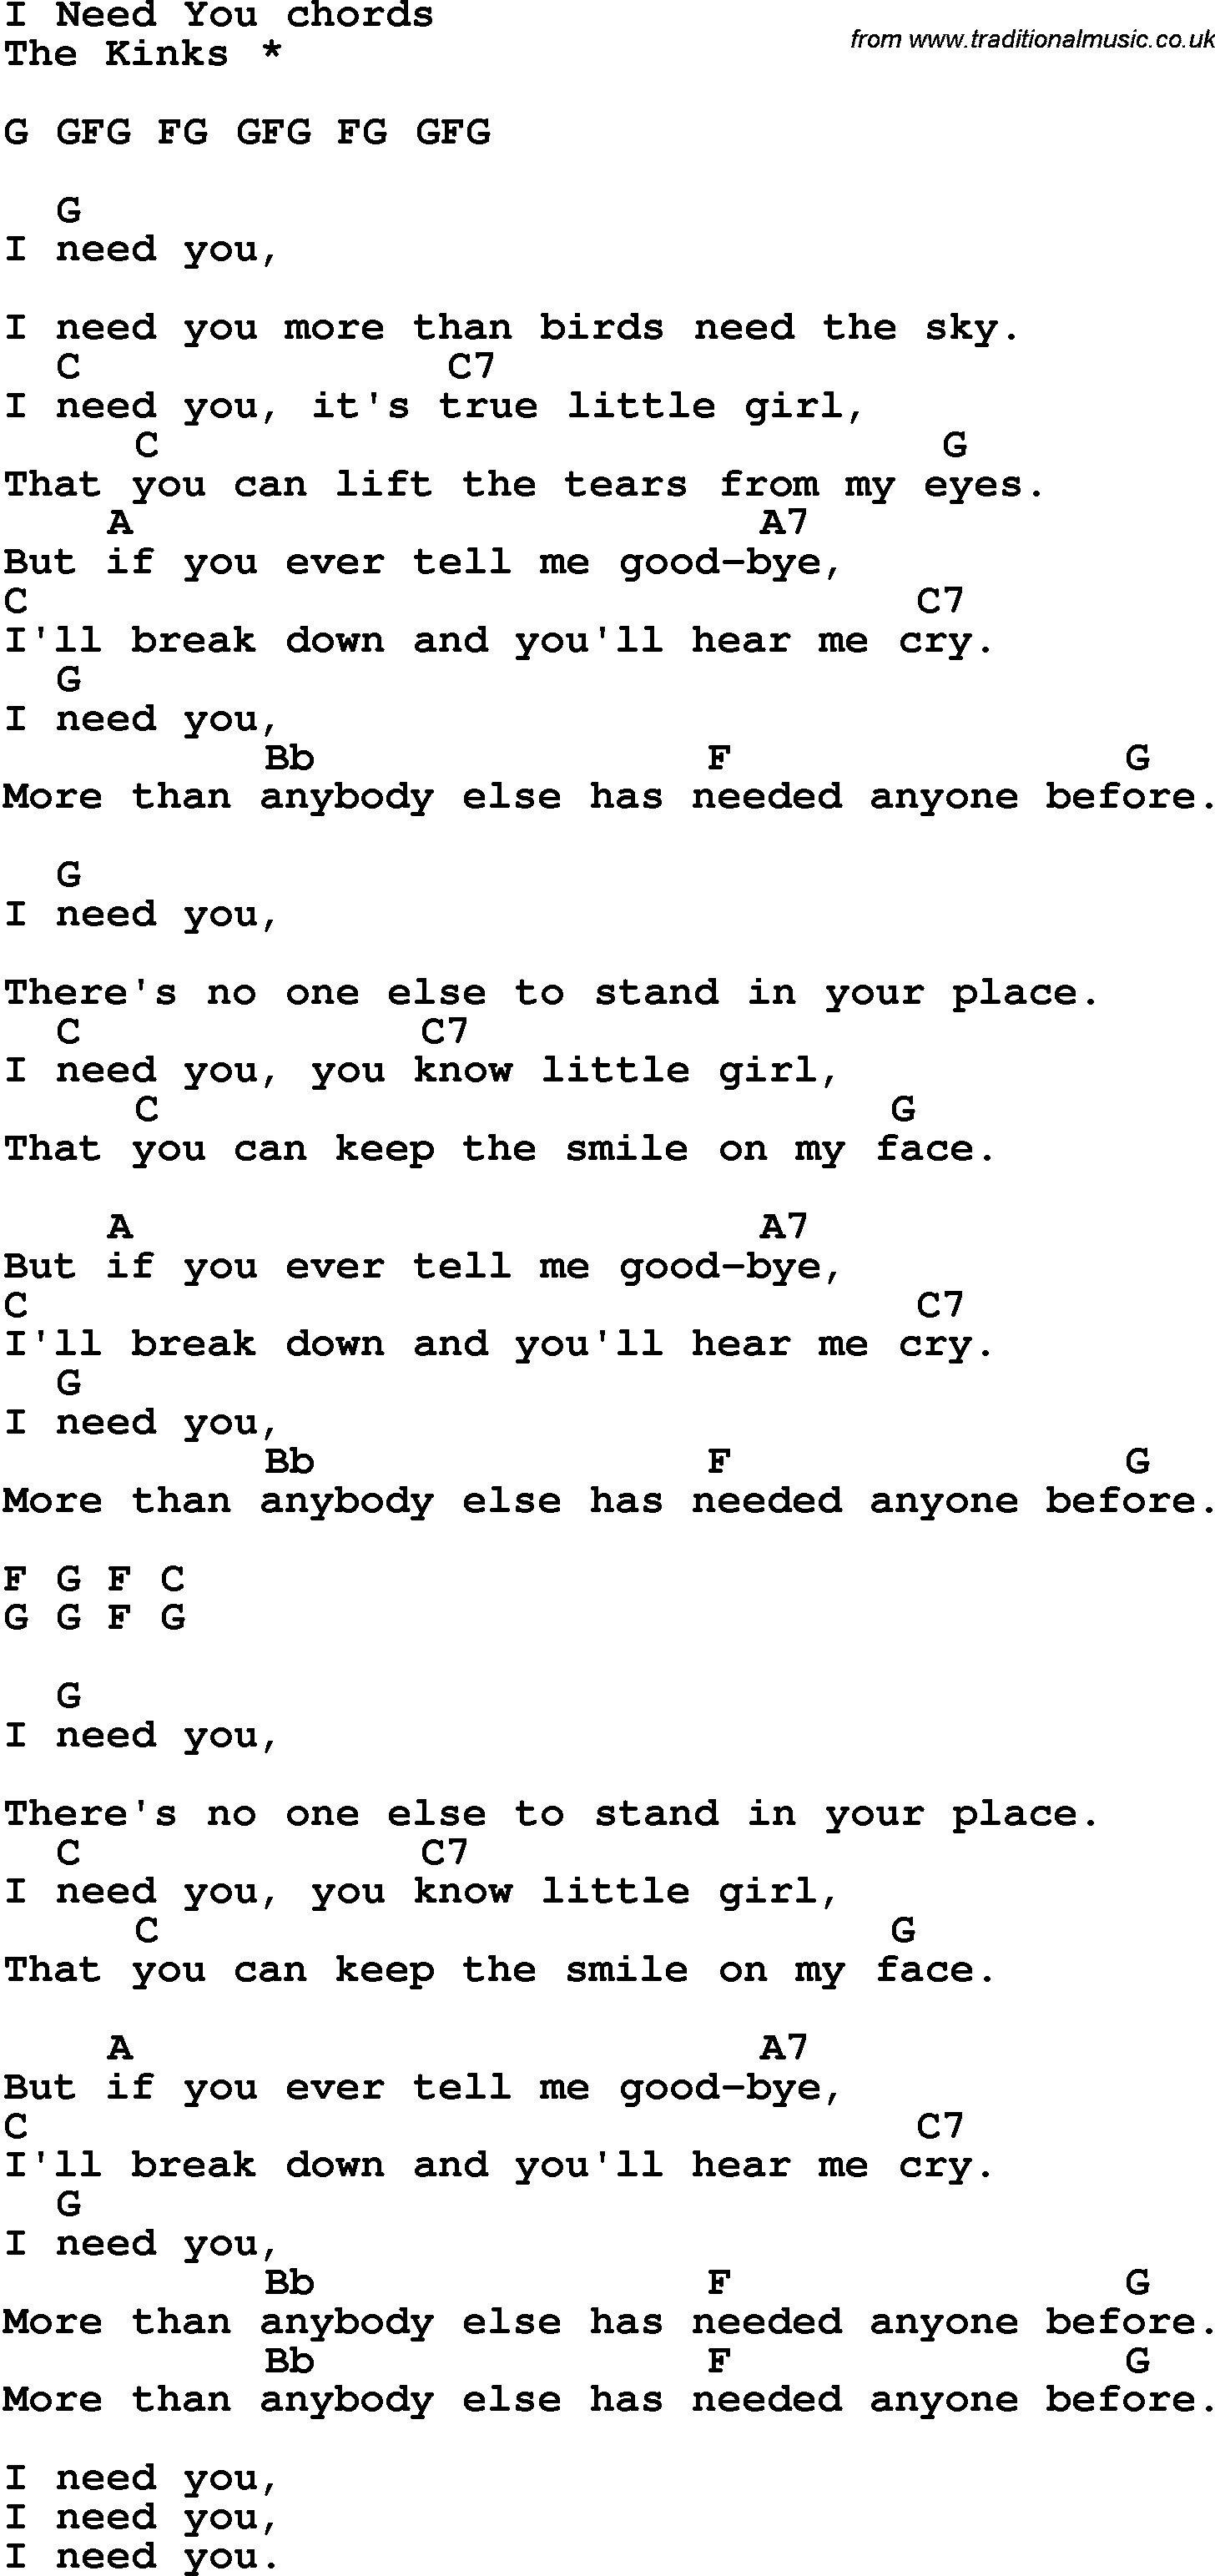 Song Lyrics with guitar chords for I Need You - The Kinks